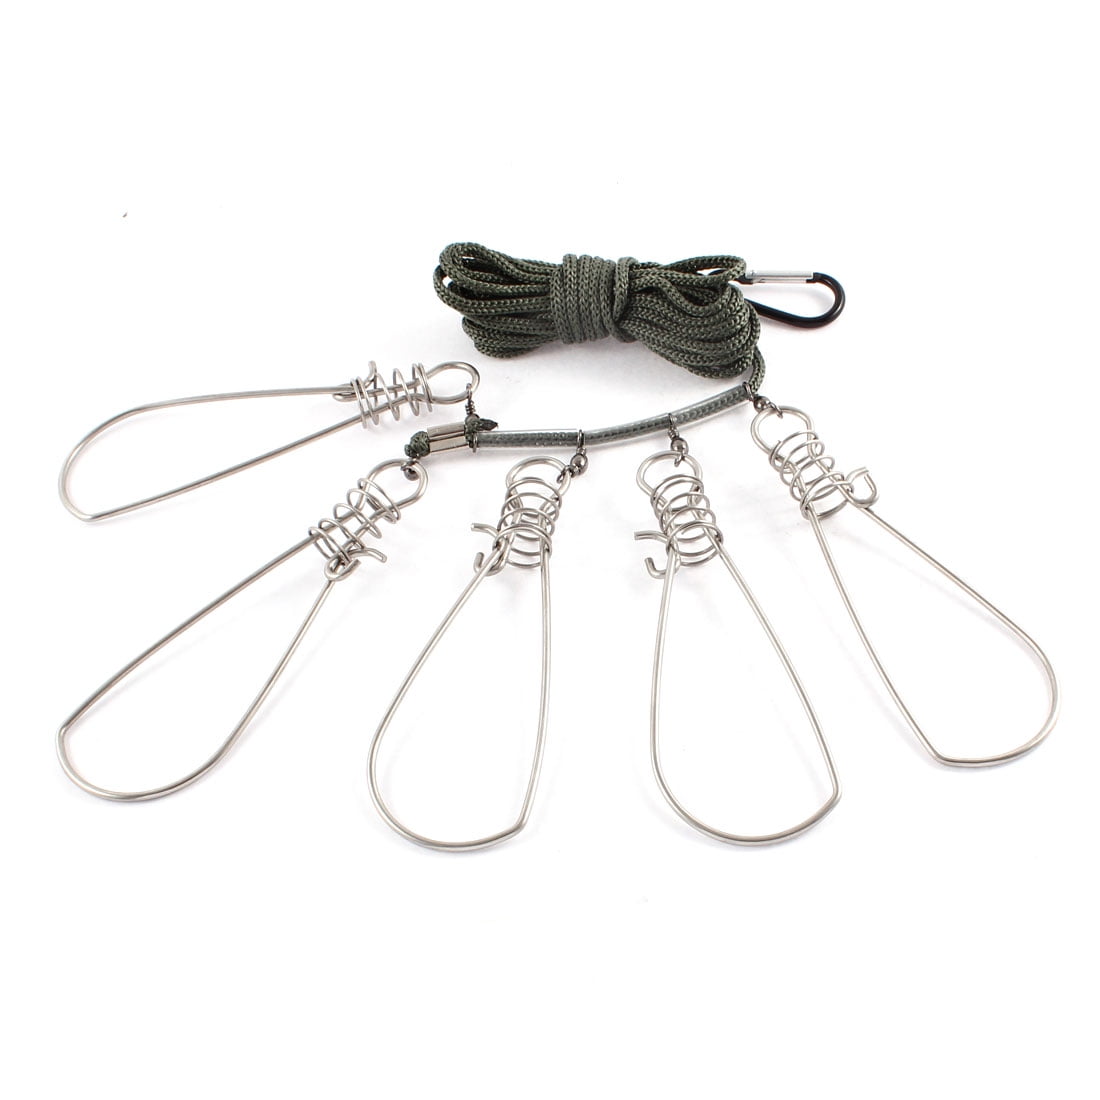 Scuba Choice Spearfishing 16" Stainless Steel Large Fish Stringer loop 